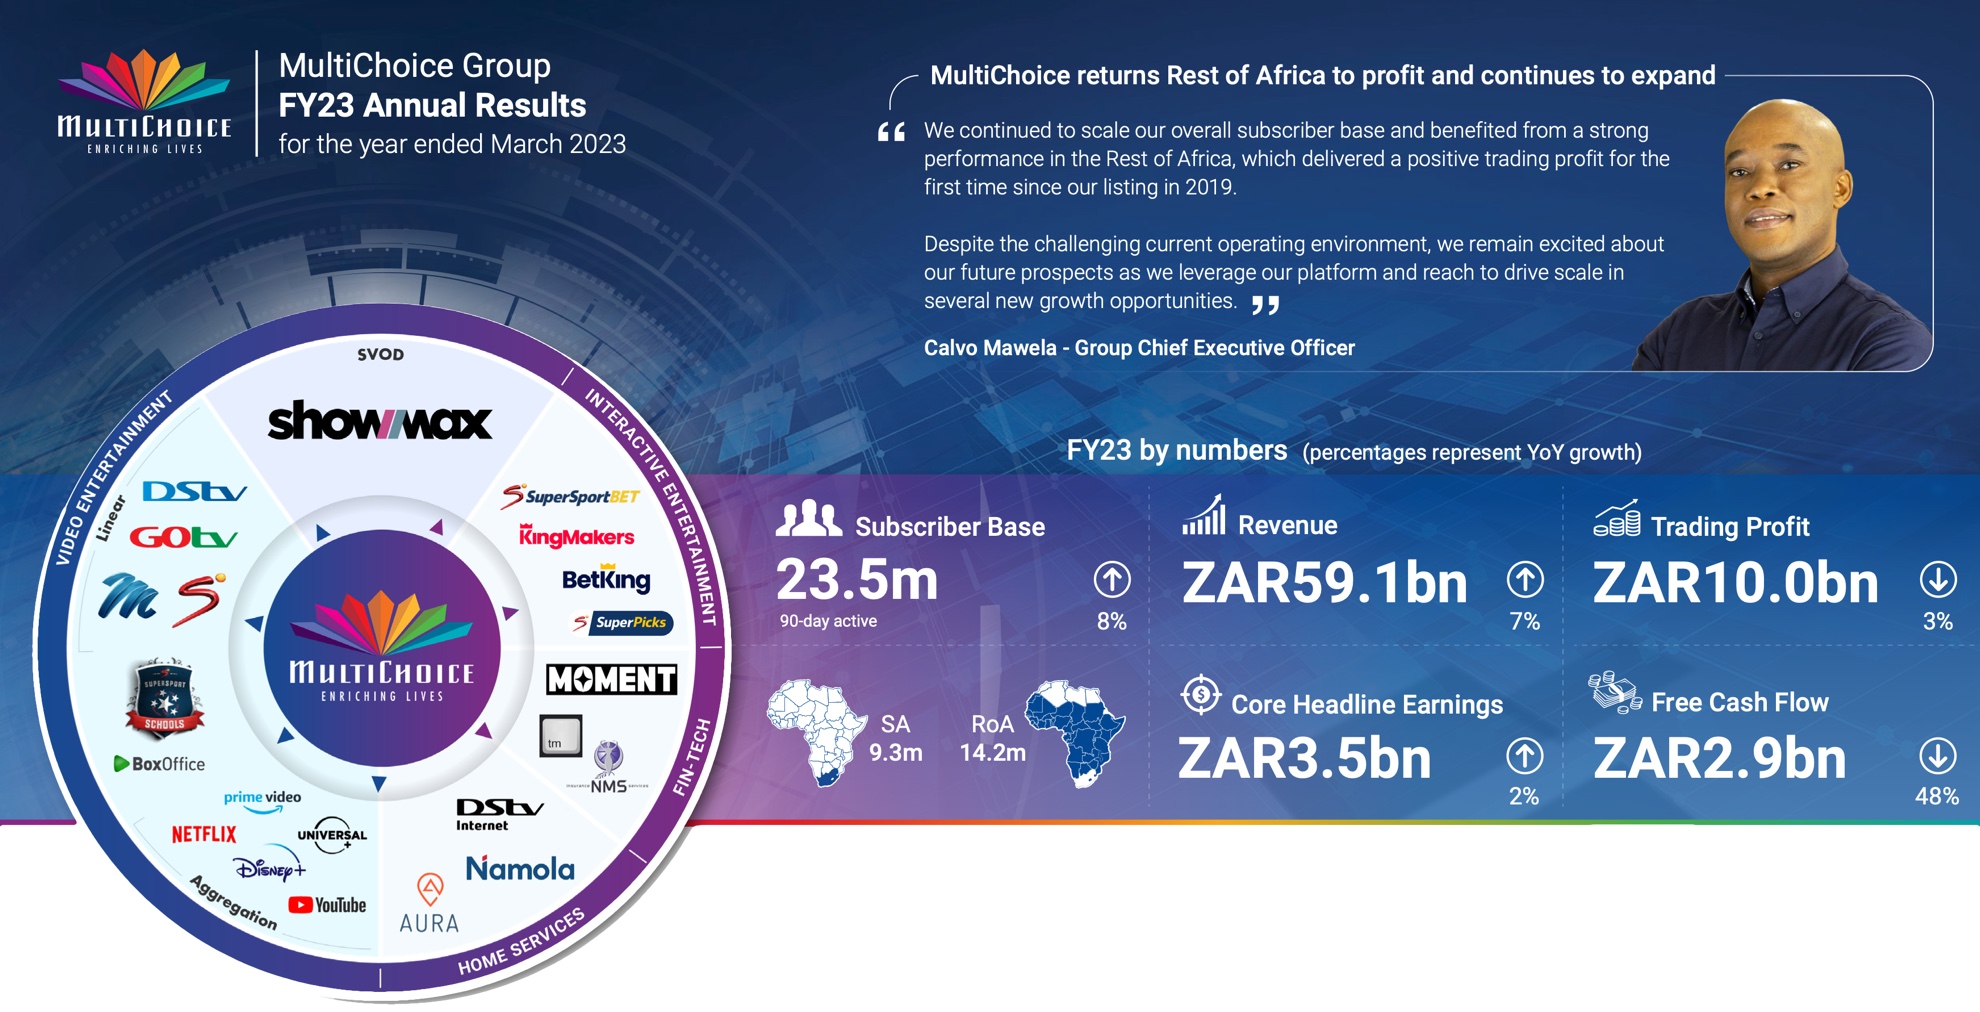 MultiChoice returns rest of Africa to profit and continues to expand